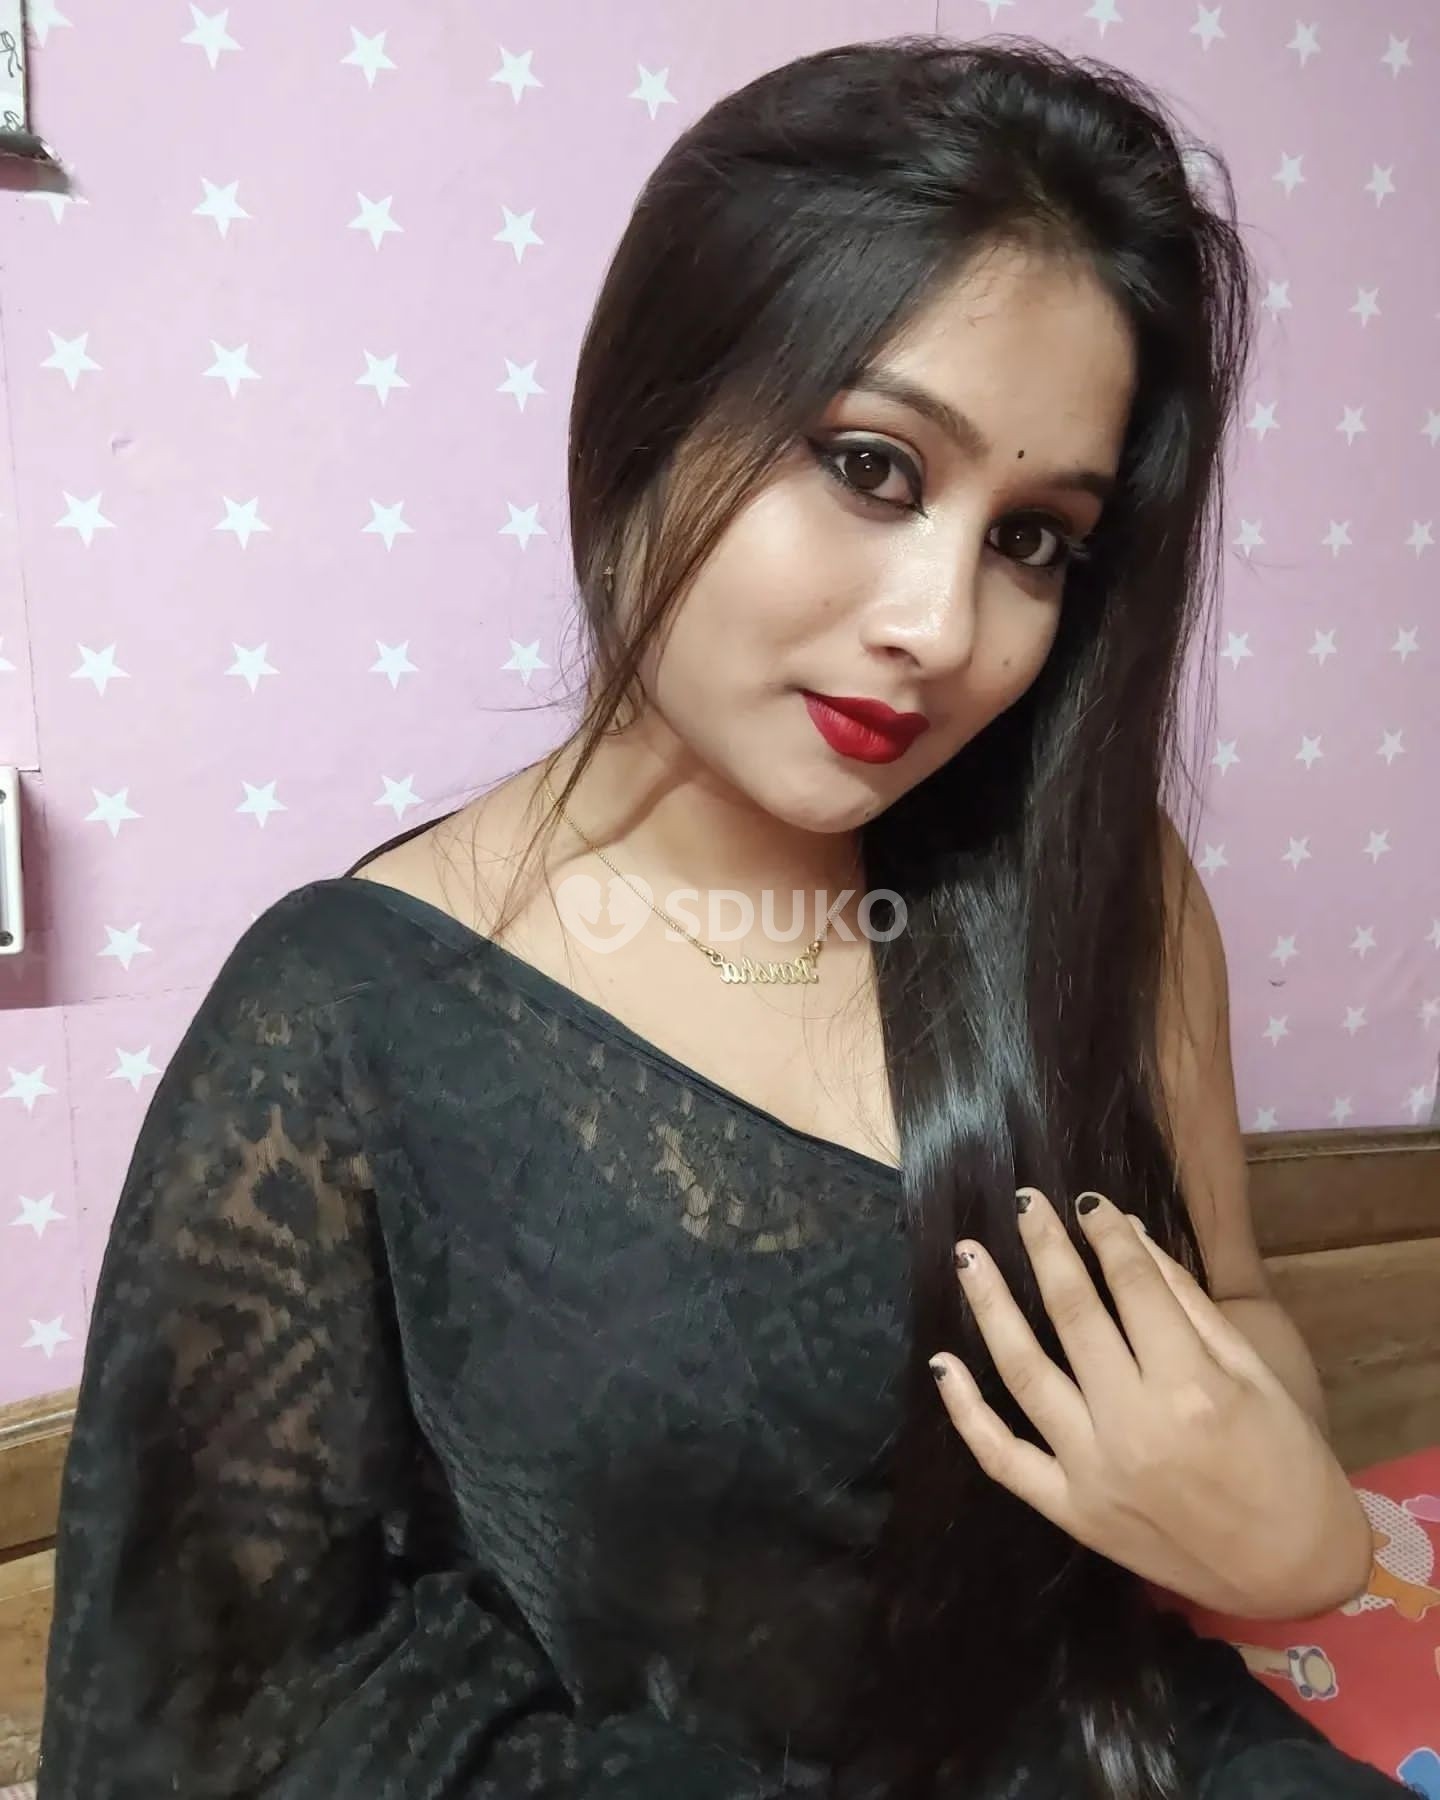 Indore... 🆑 TODAY LOW PRICE 100% SAFE AND SECURE GENUINE CALL GIRL AFFORDABLE PRICE CALL NOW 24/7 AVAILABLE